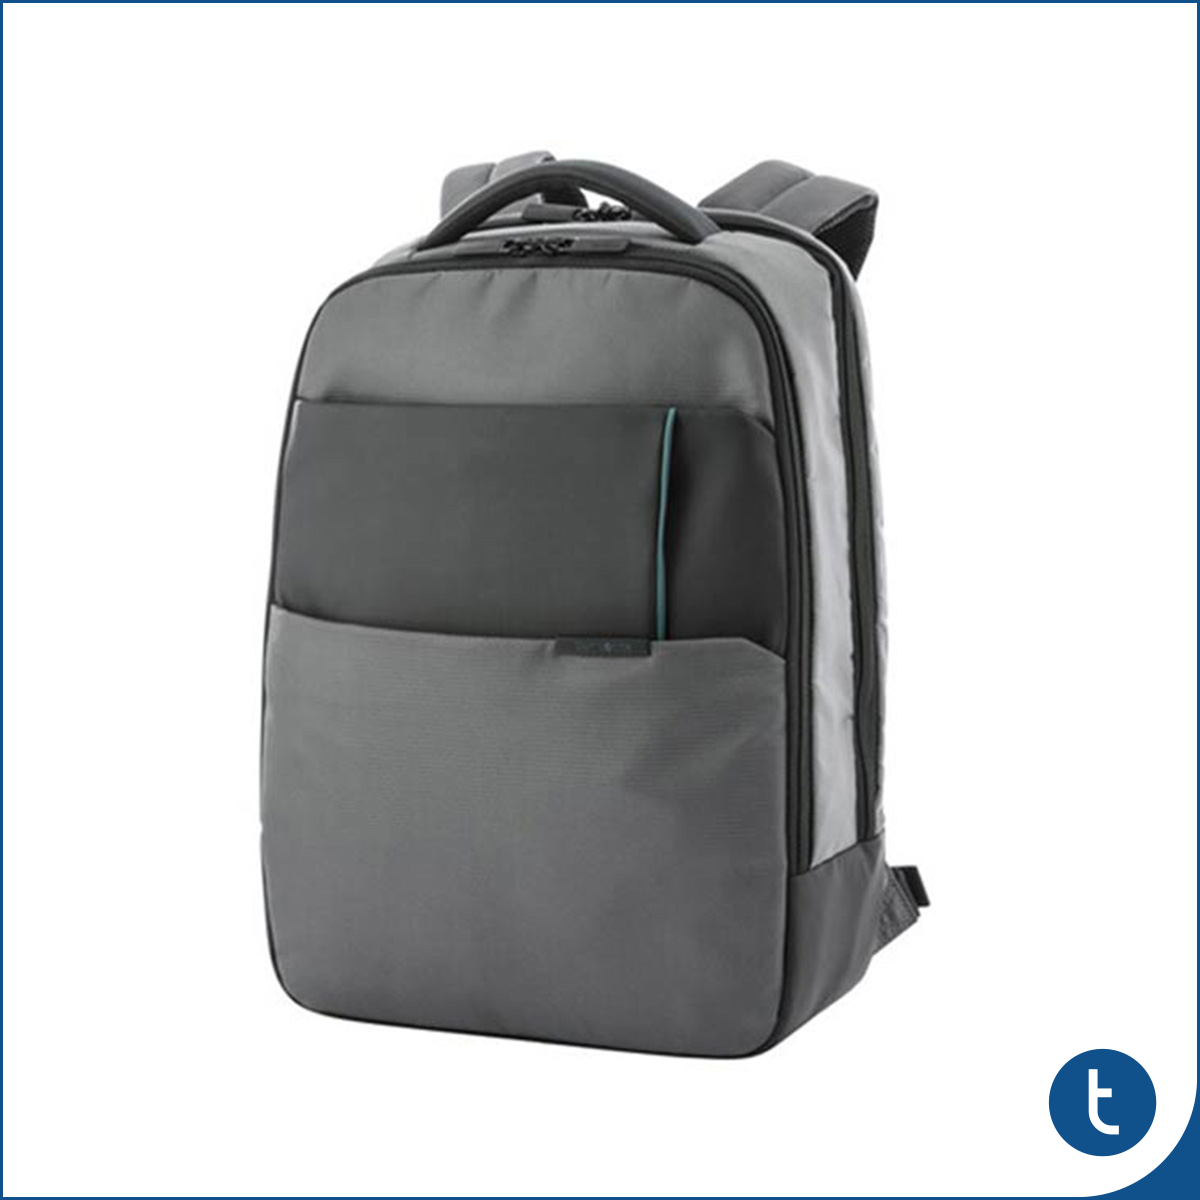 Tech ICT 15.6 Inch Laptop Backpack